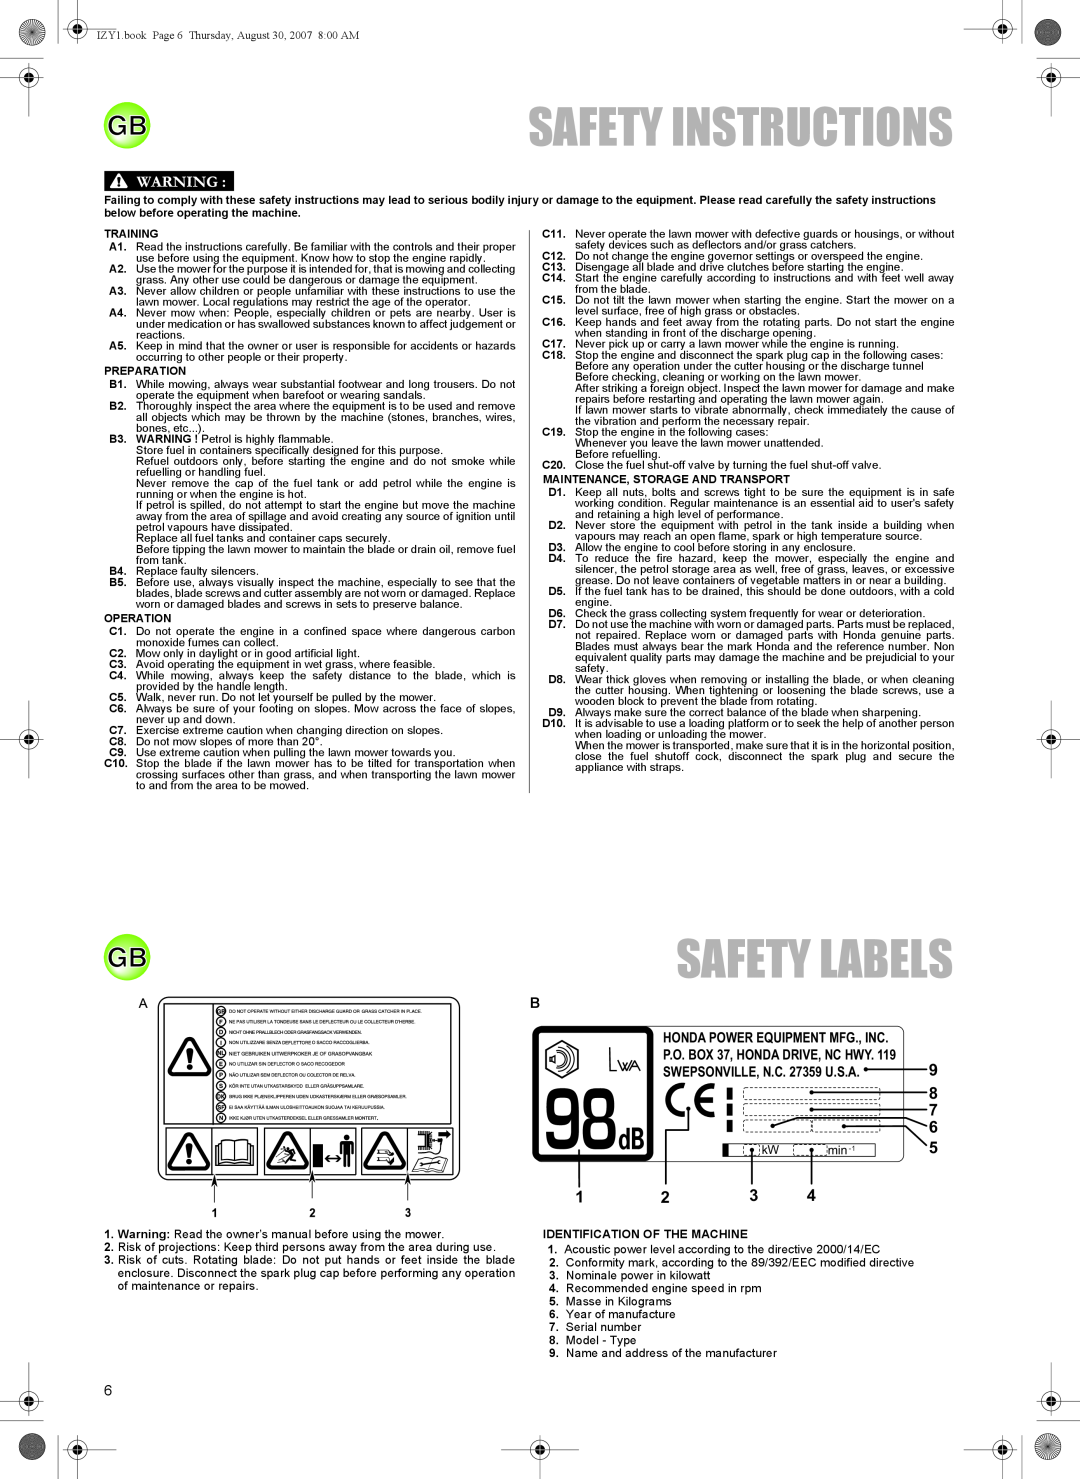 Honda Power Equipment HRG536C owner manual Safety Instructions, Safety Labels,   , B +21$32:548,30170*,1& 